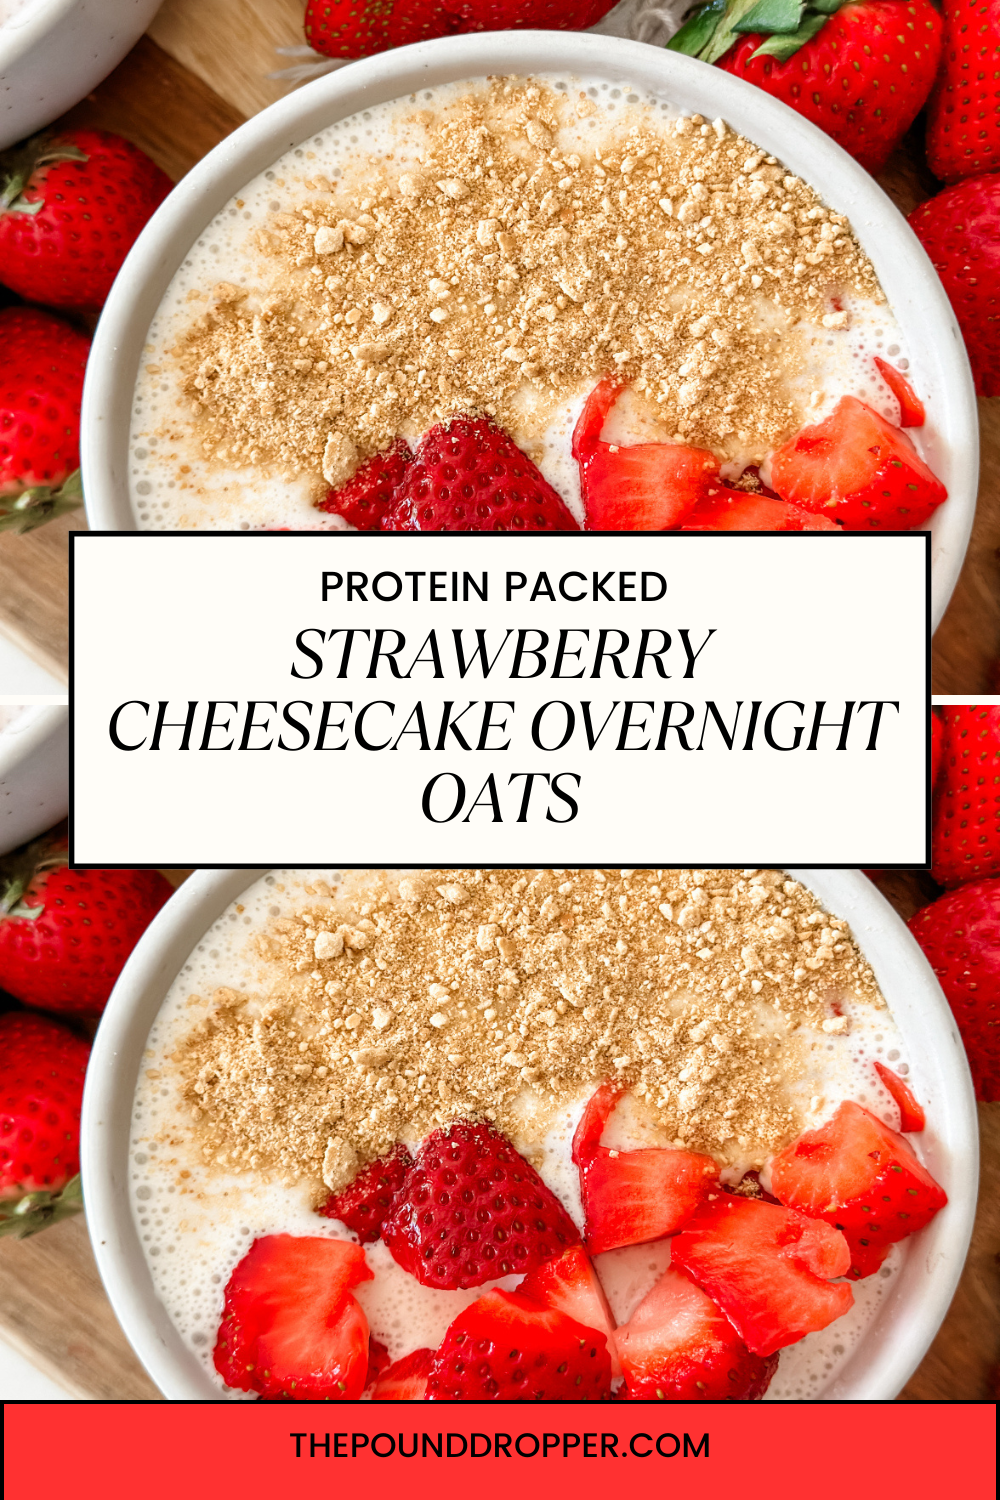 Start your morning with these Protein Packed Strawberry Cheesecake Overnight Oats! This is a tasty make ahead breakfast recipe takes less than 5 minutes to prepare, and packed with nutrient-dense ingredients! It's a healthy, easy, and delicious way to start your day! via @pounddropper